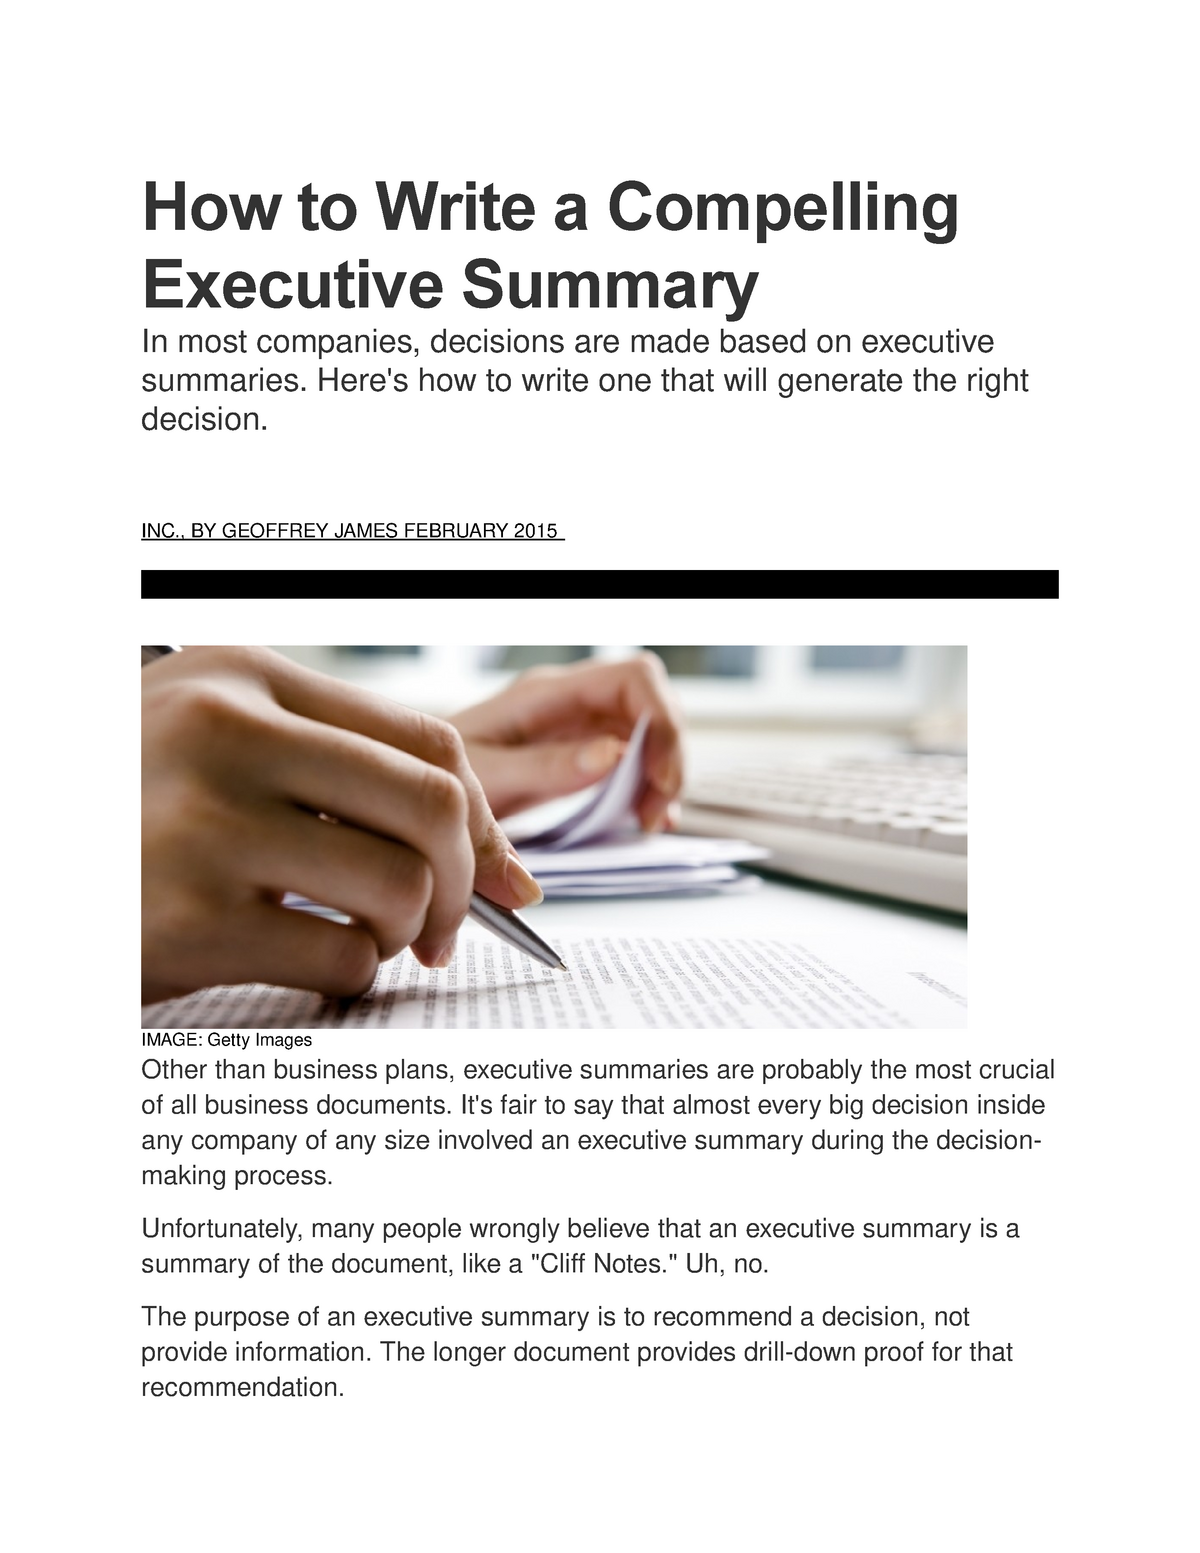 How to Write a Compelling Executive Summary inc 20 - How to